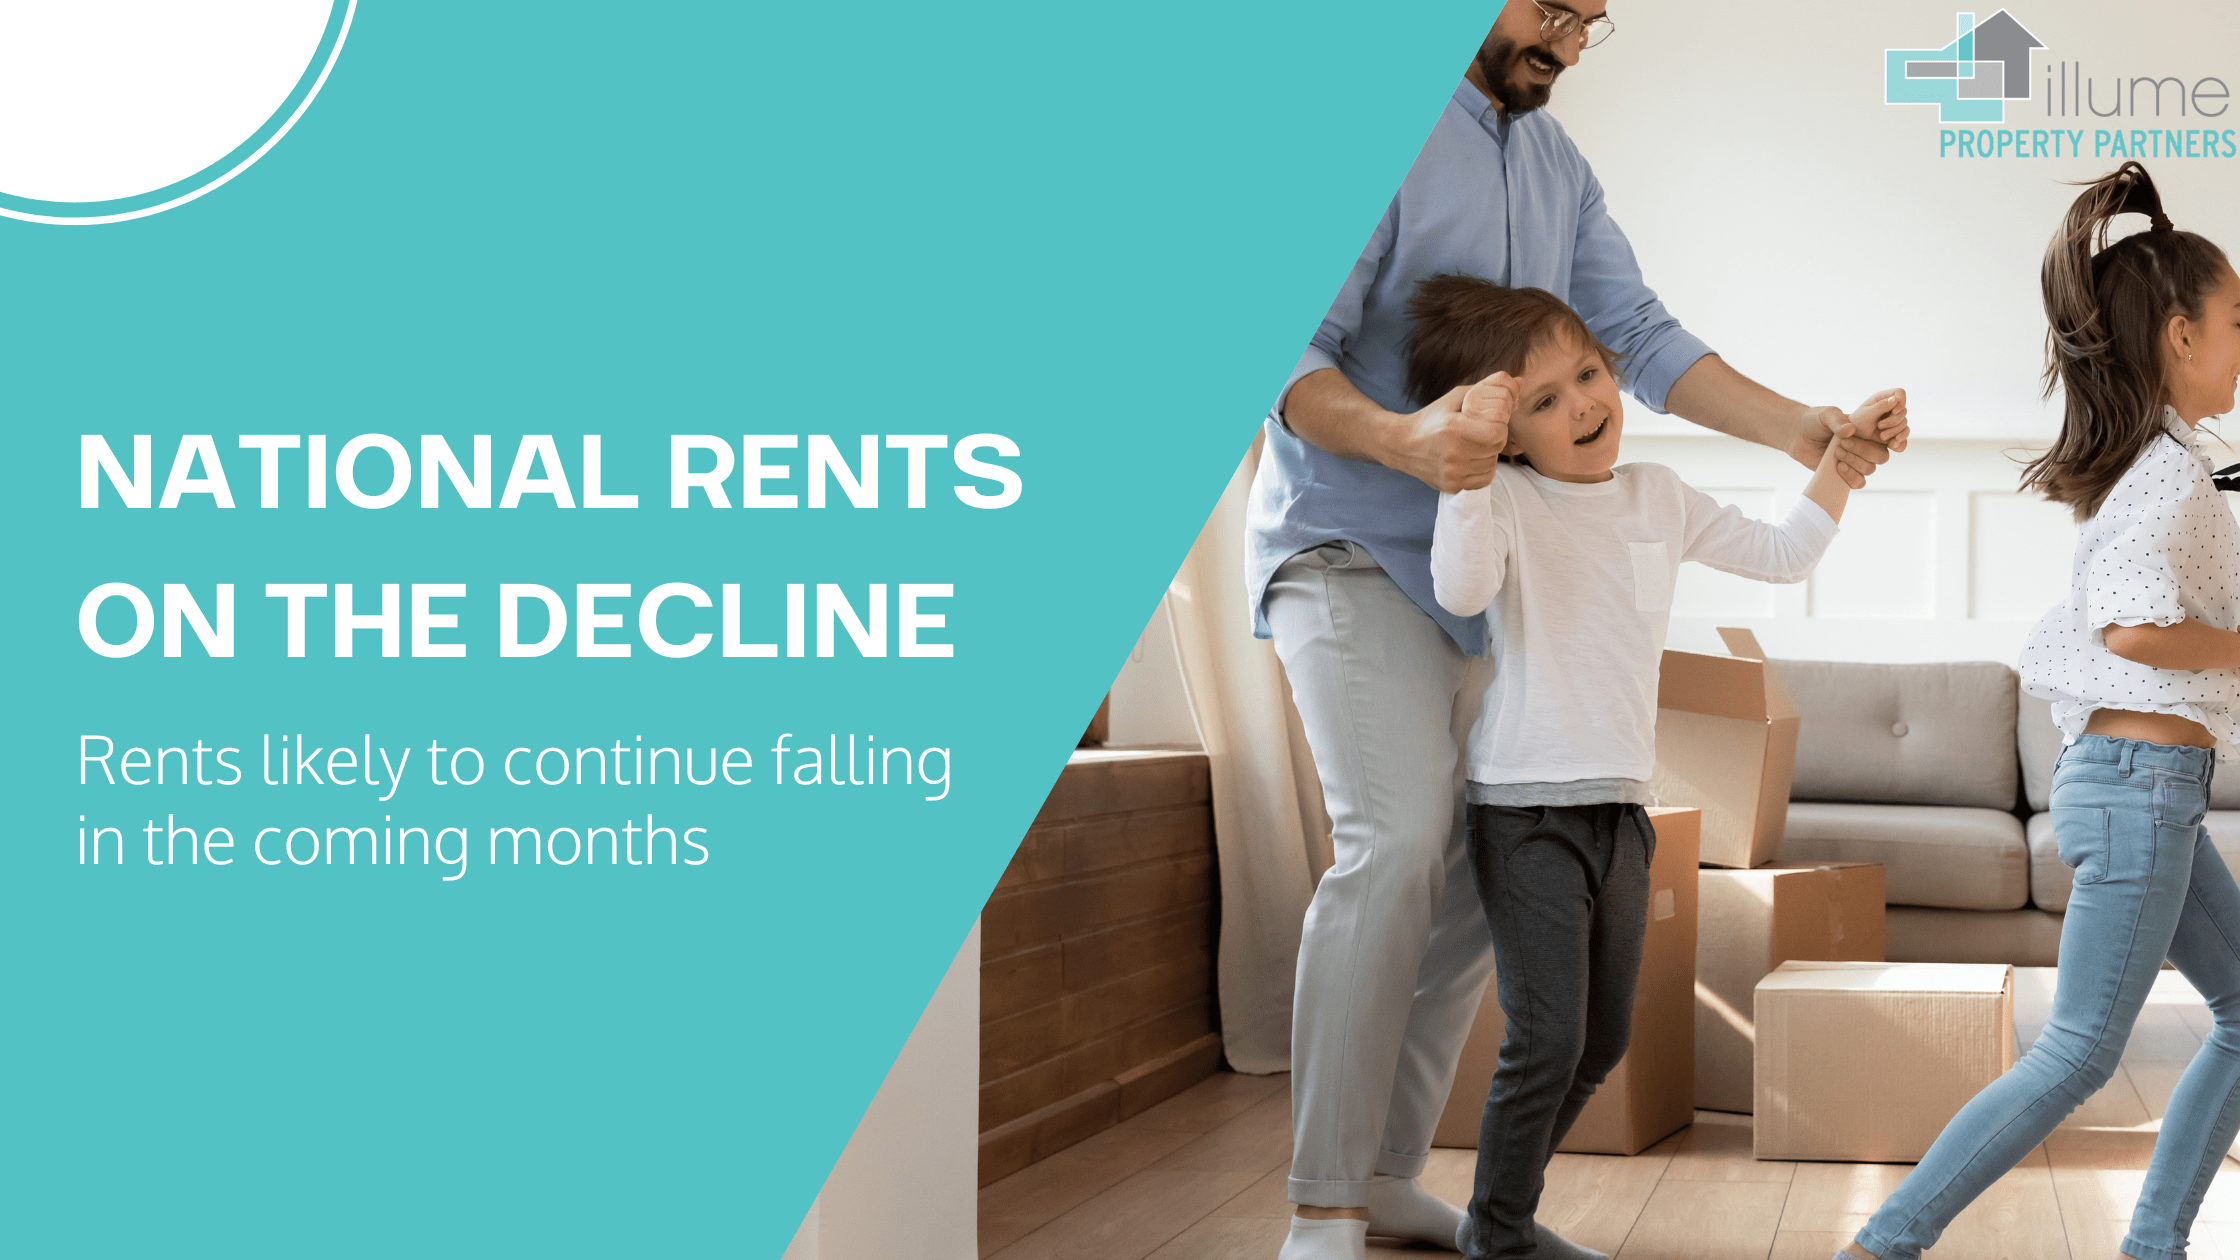 National Rents on the Decline